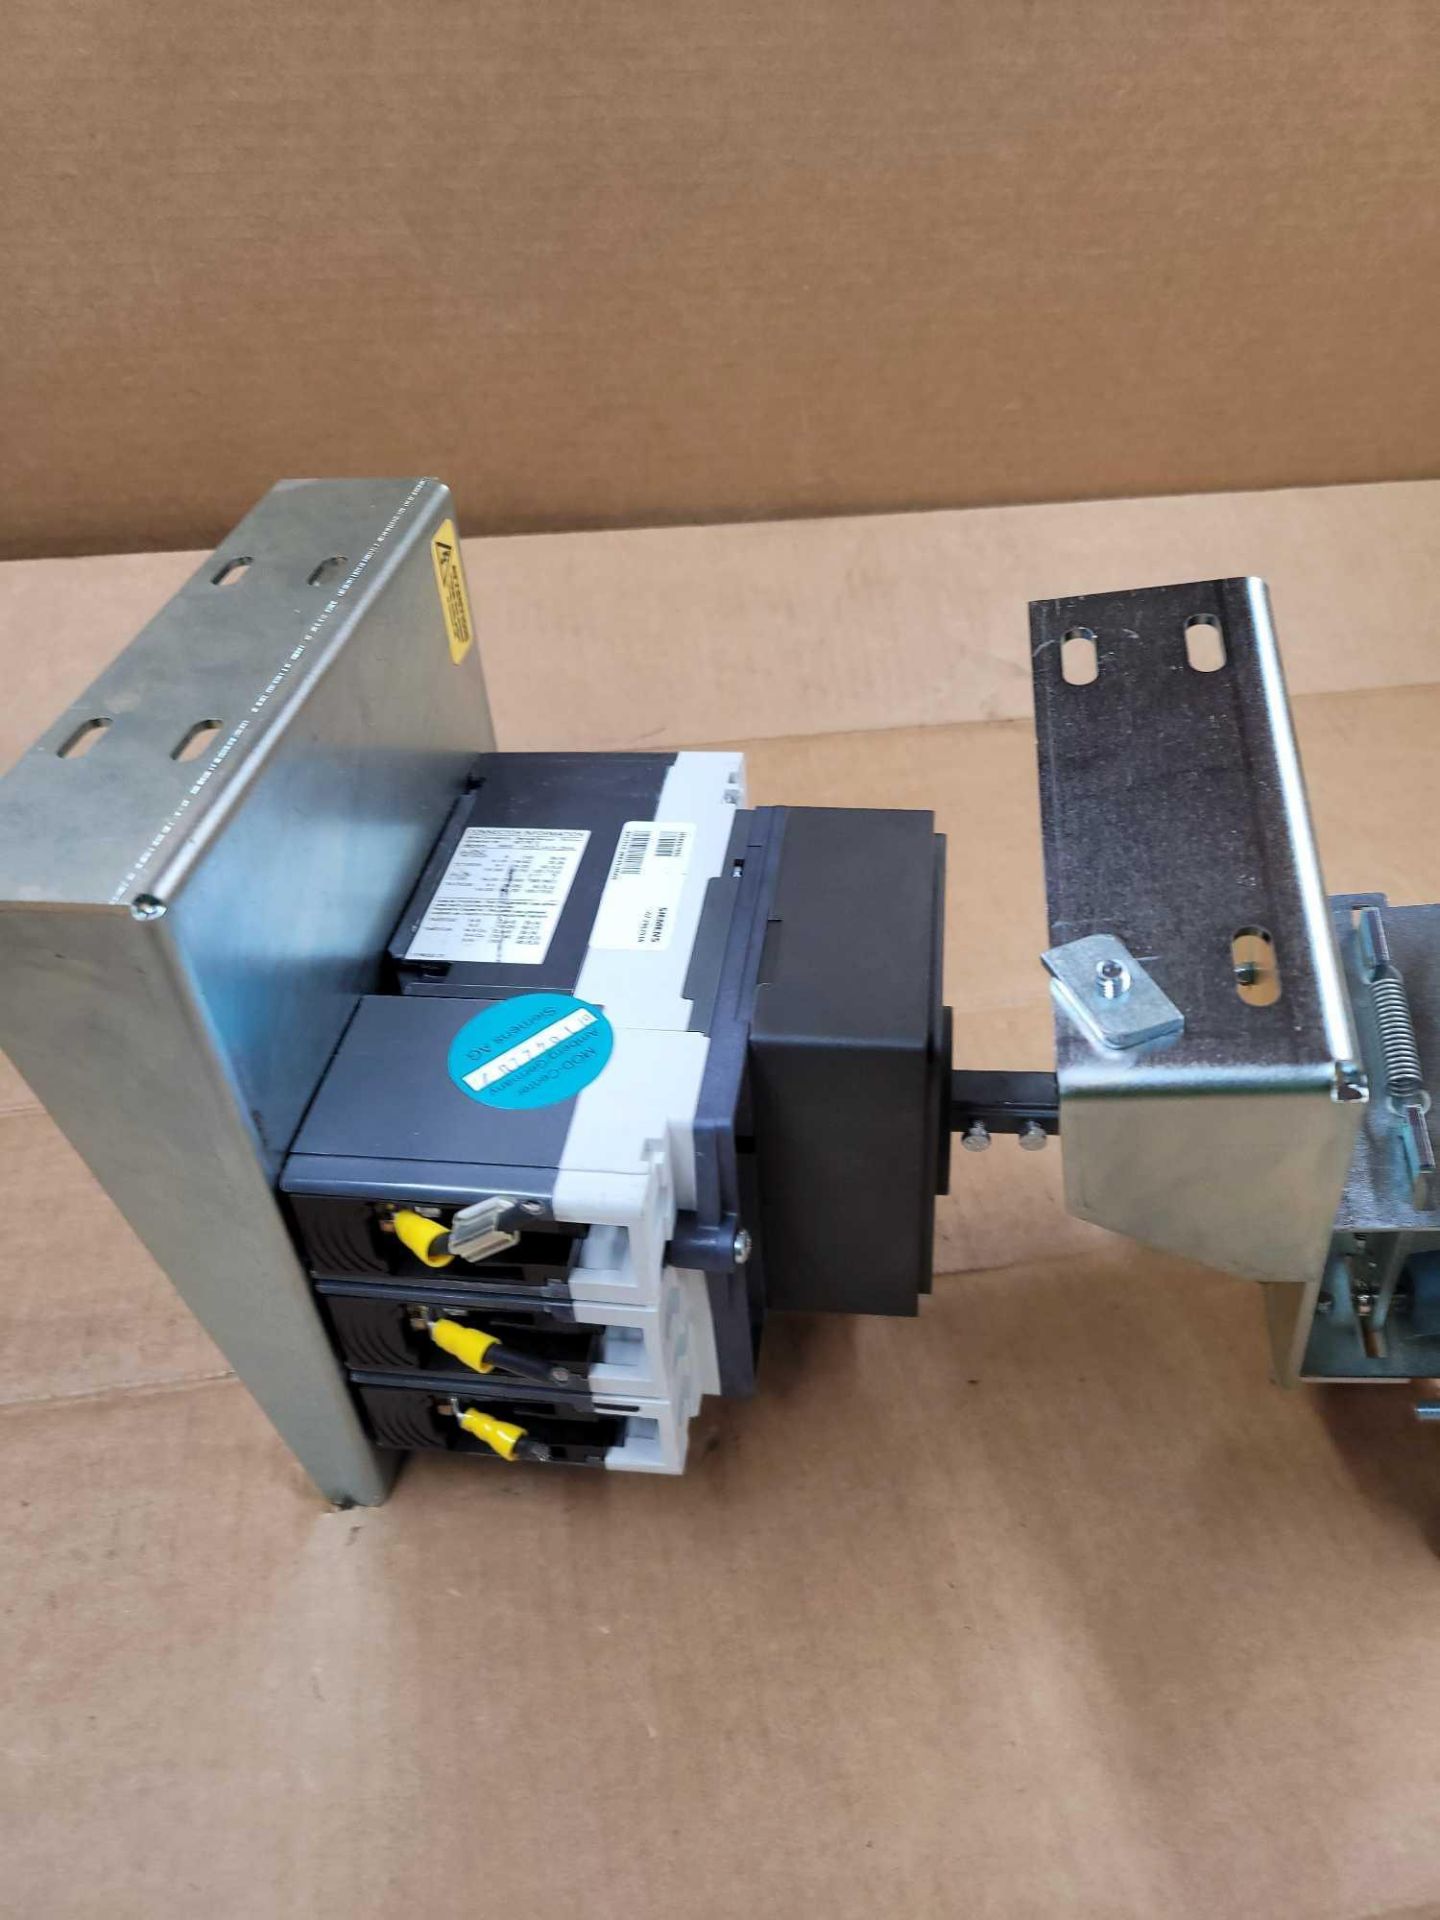 SIEMENS HDR3S150L with 3VL9300-3HE01 and SCA 90002.919005 / 150 Amp Circuit Breaker with Rotary Oper - Bild 6 aus 9